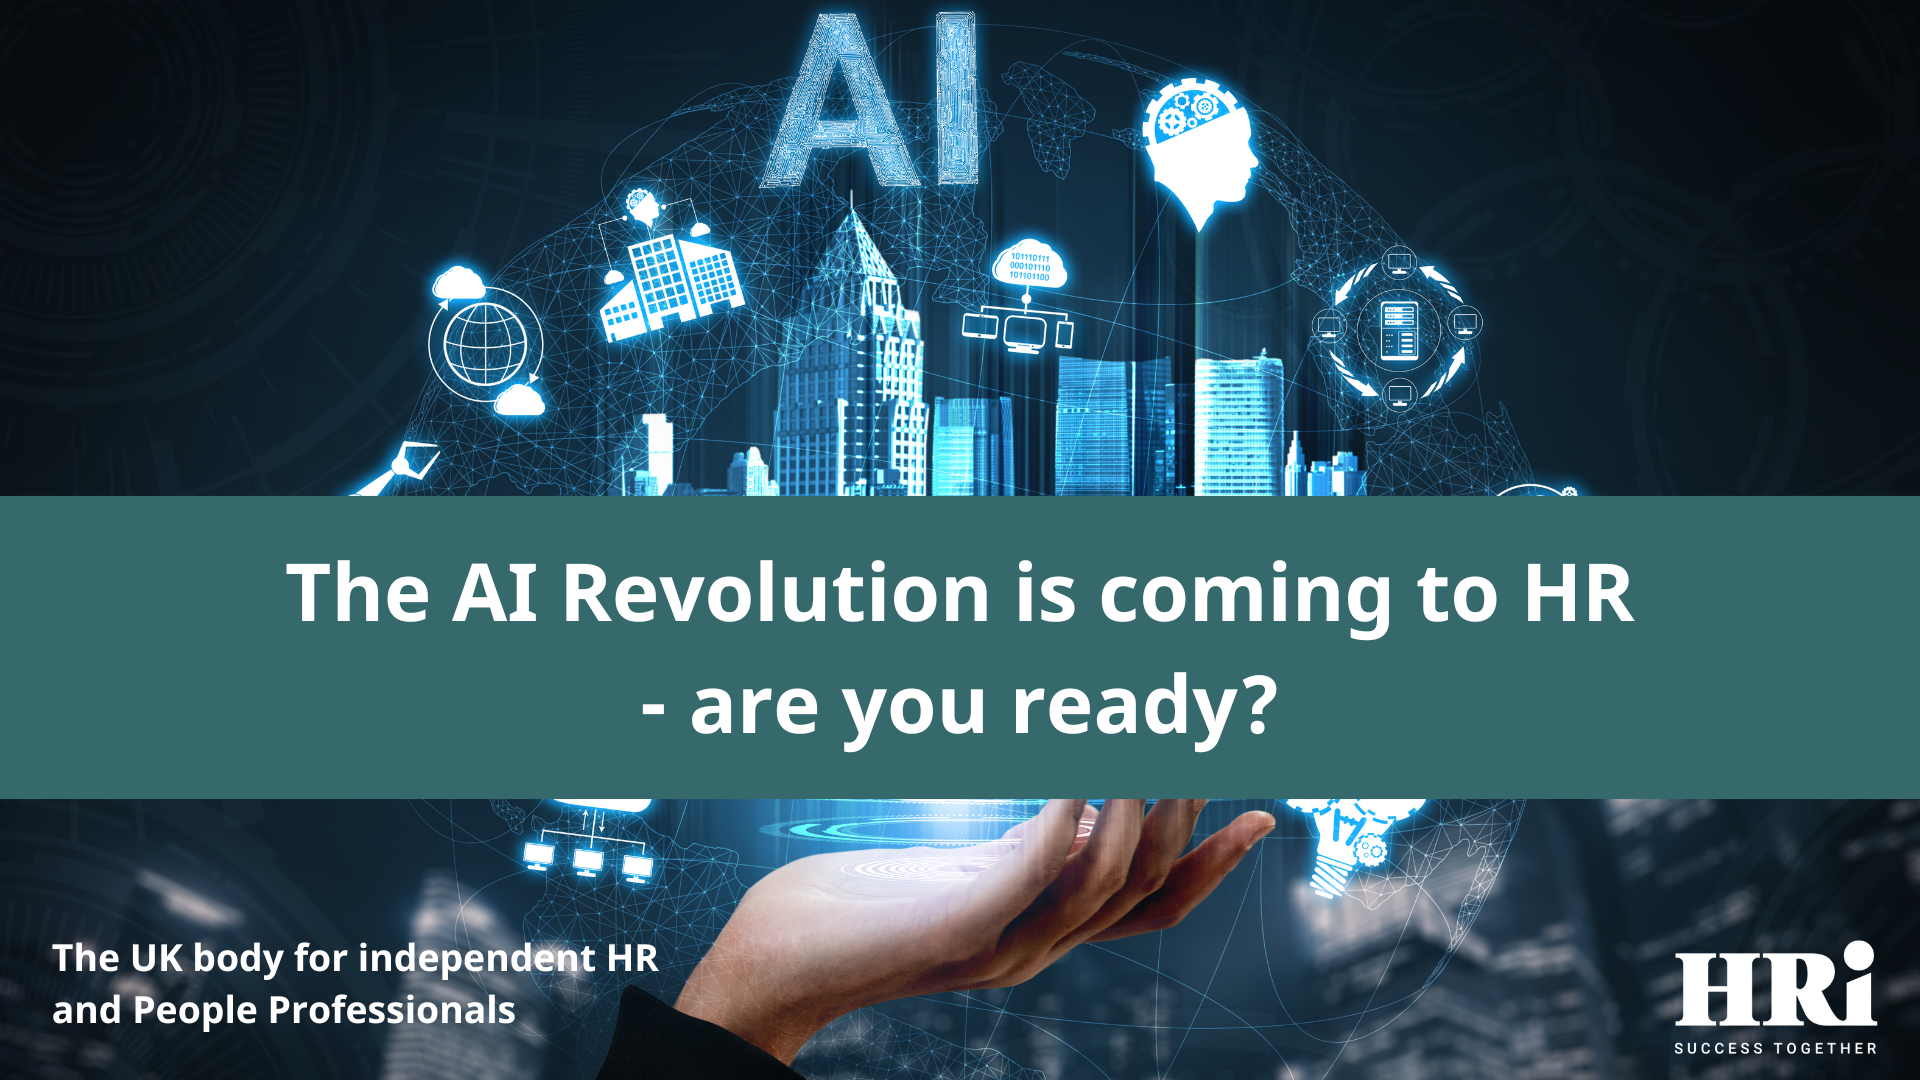 AI learning and artificial intelligence with the text The AI Revolution is coming to HR - are you ready?